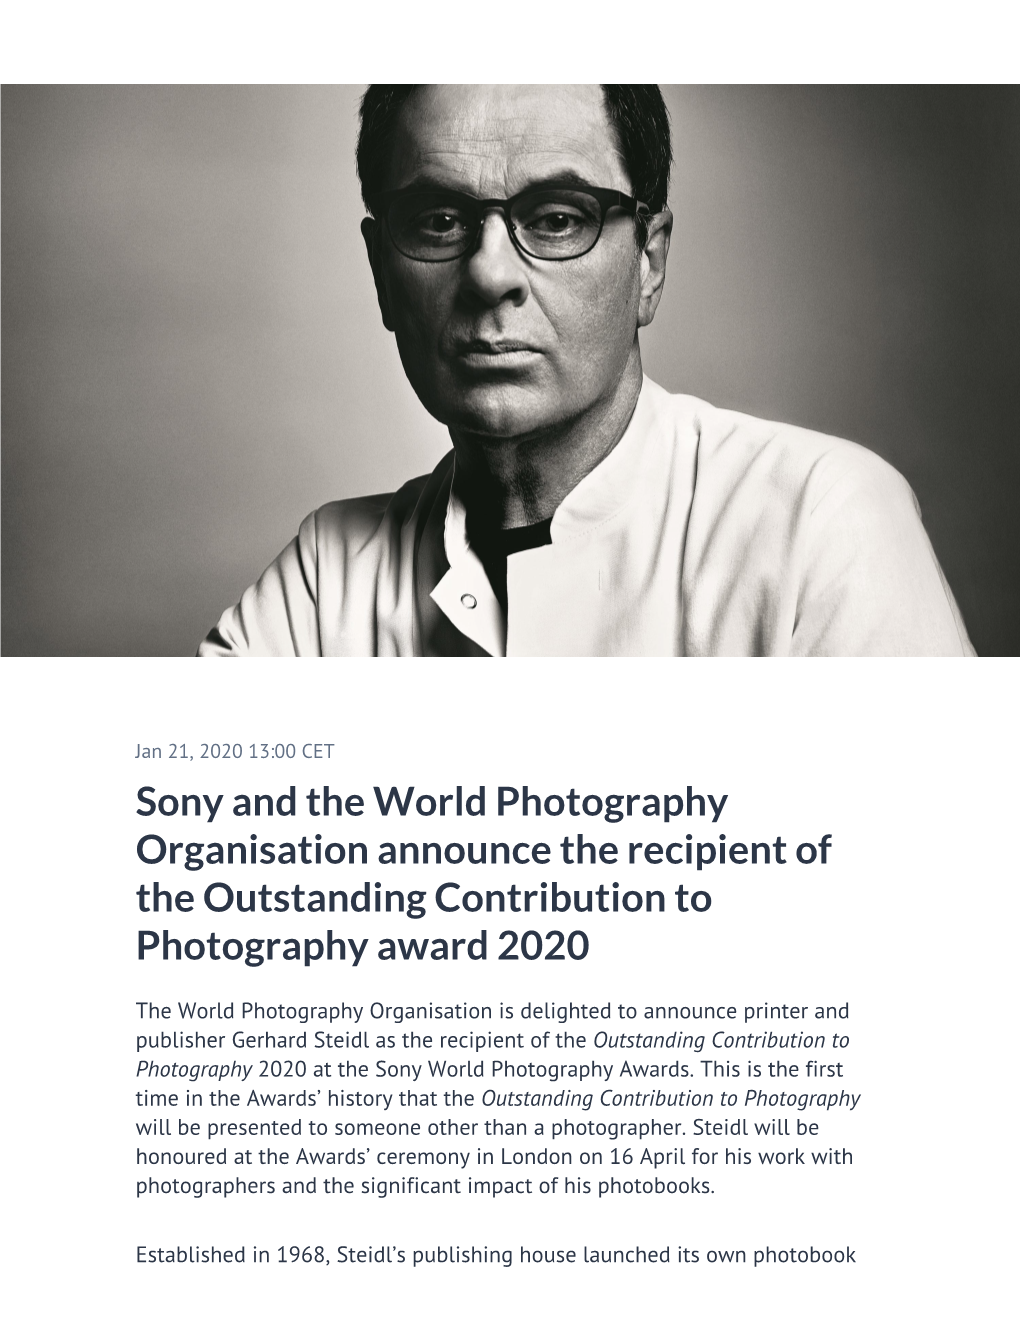 Sony and the World Photography Organisation Announce the Recipient of the Outstanding Contribution to Photography Award 2020